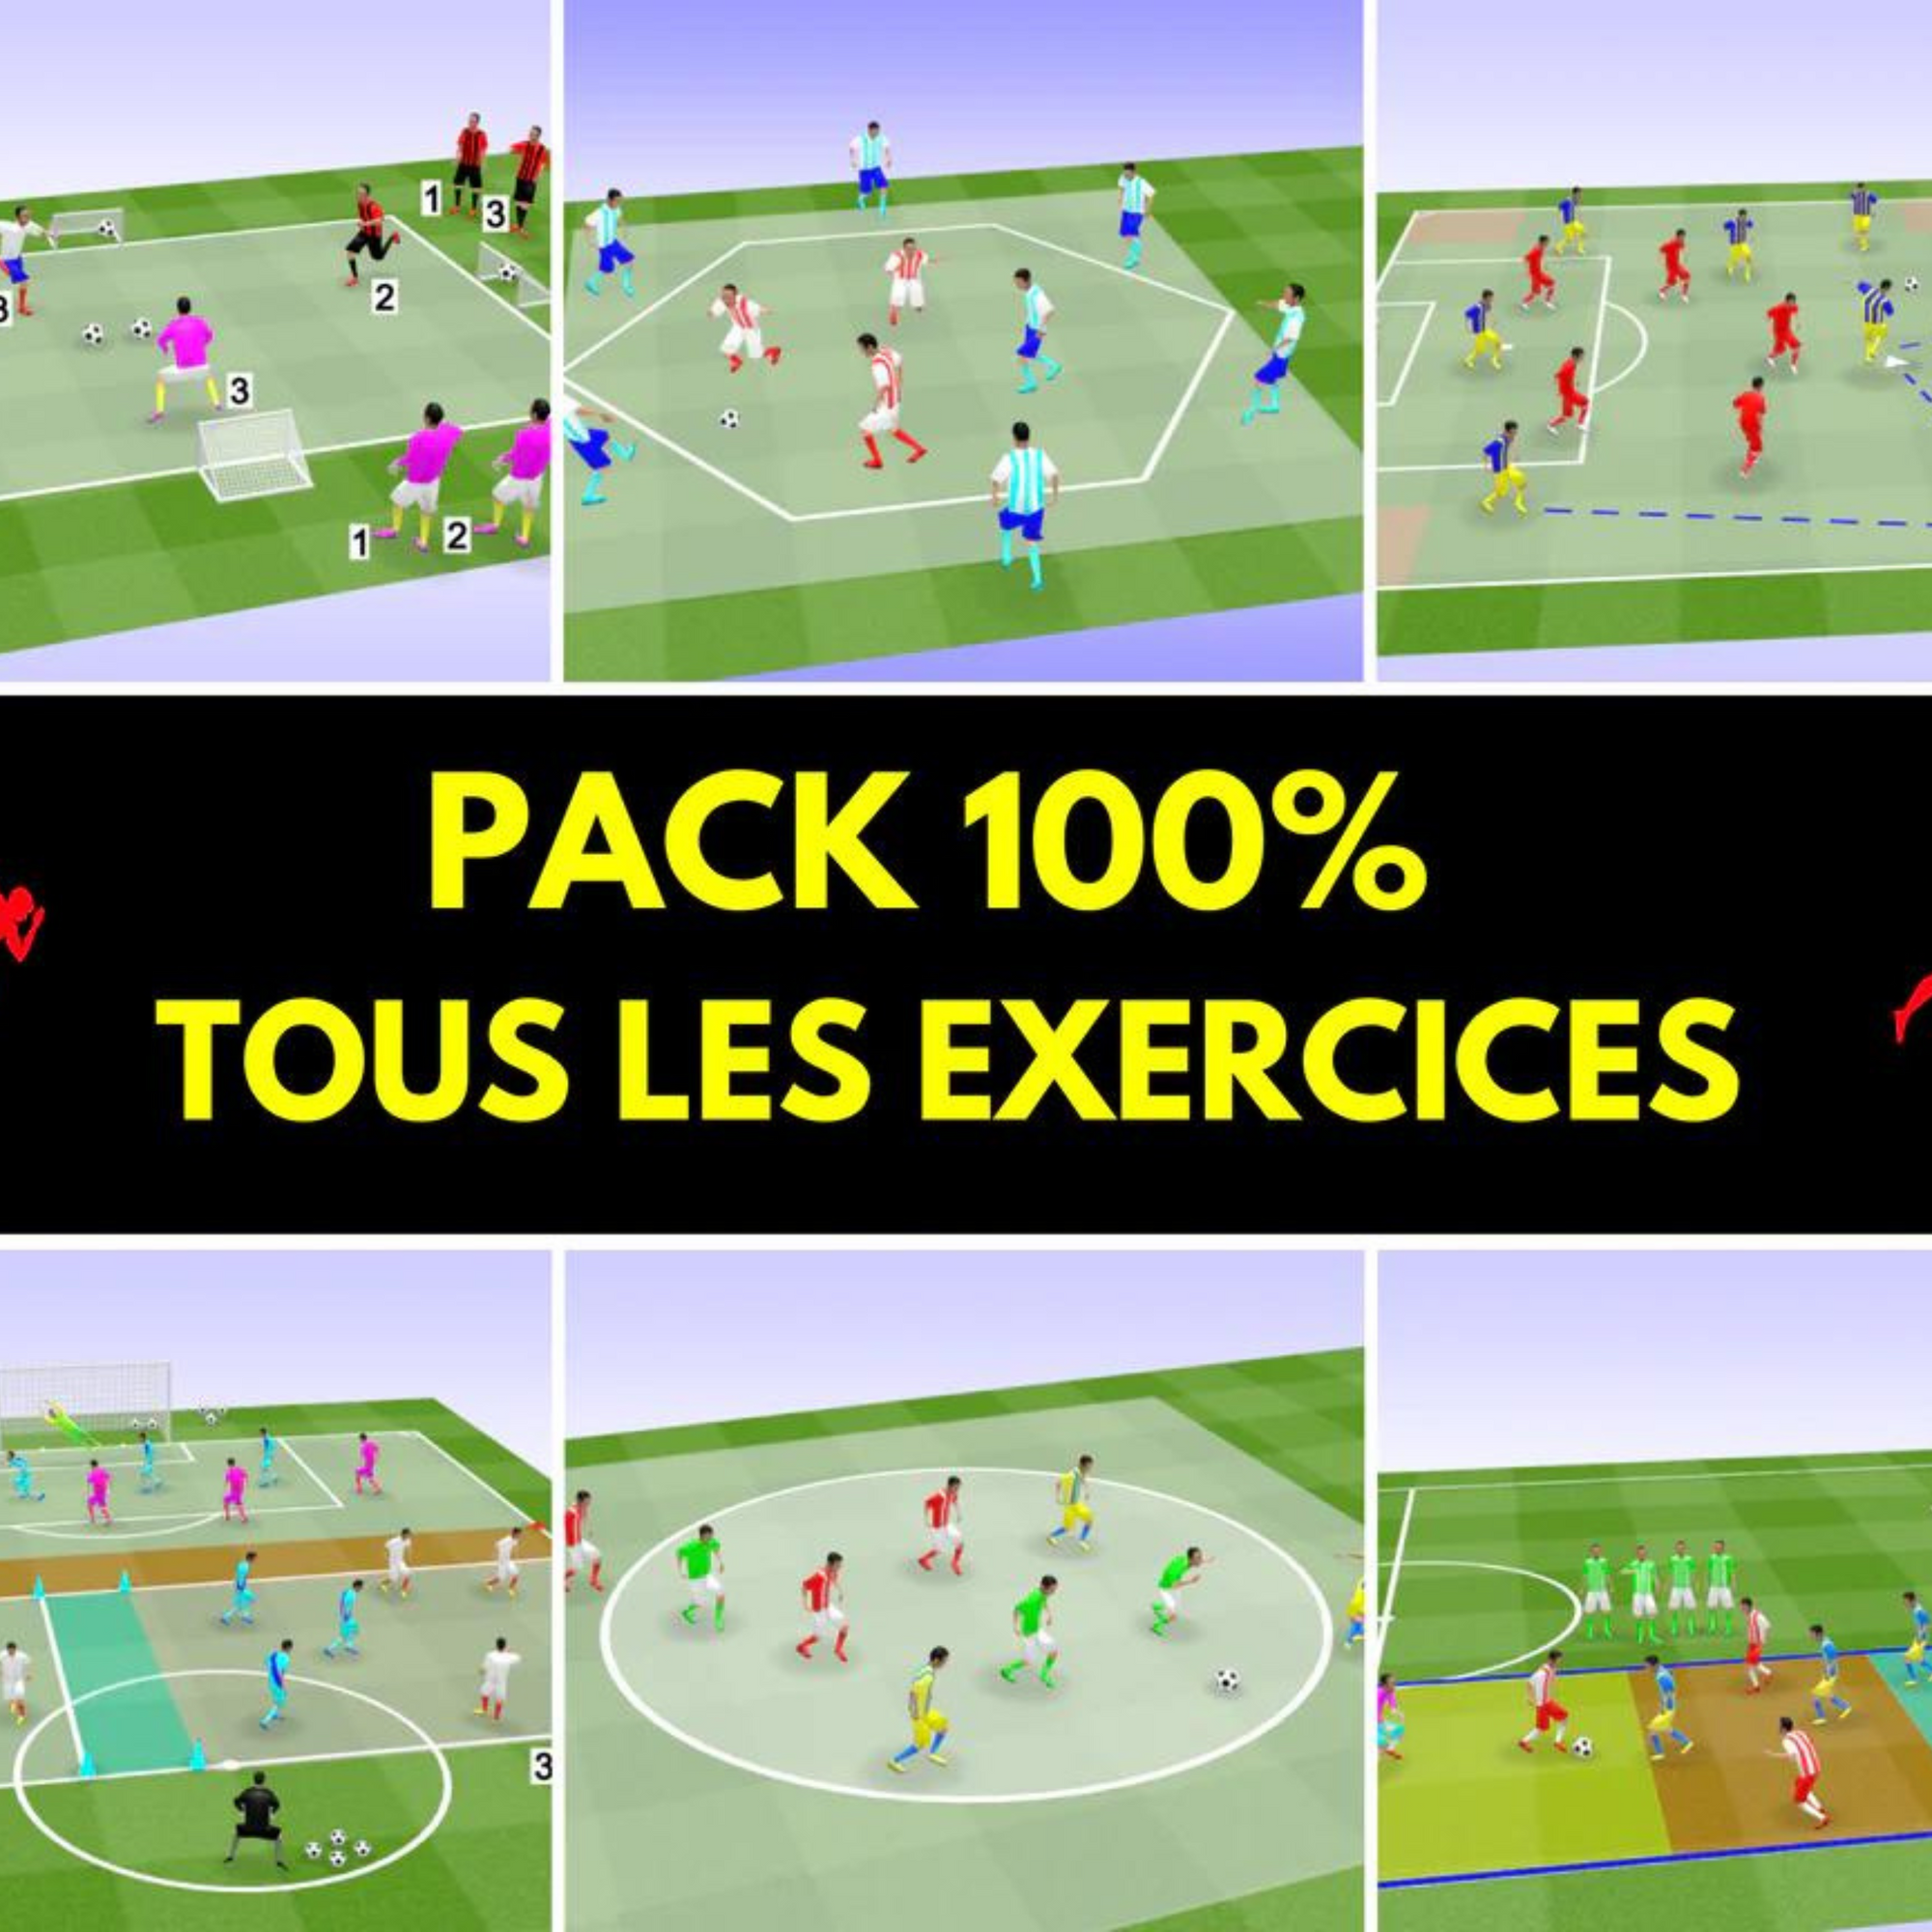 PACK 100% TOUS LES EXERCICES